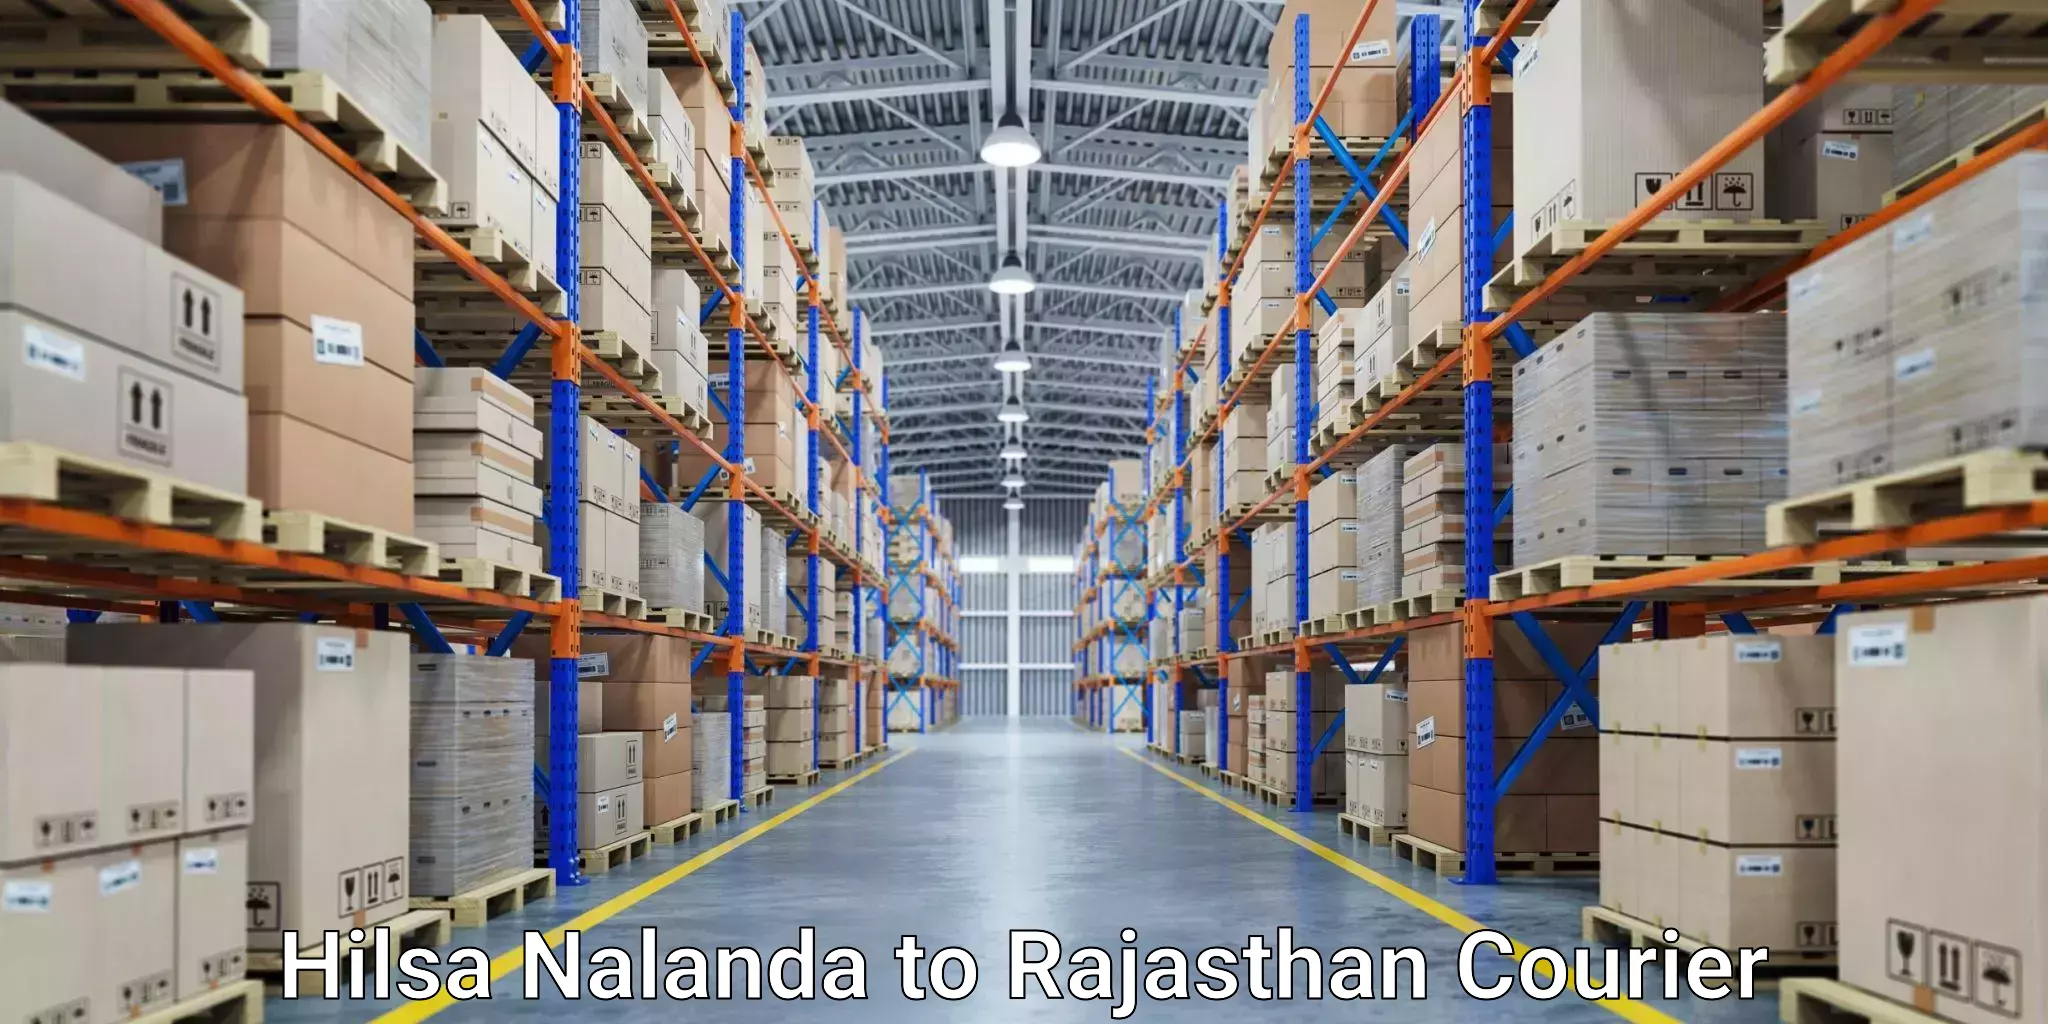 Package delivery network Hilsa Nalanda to Rajasthan